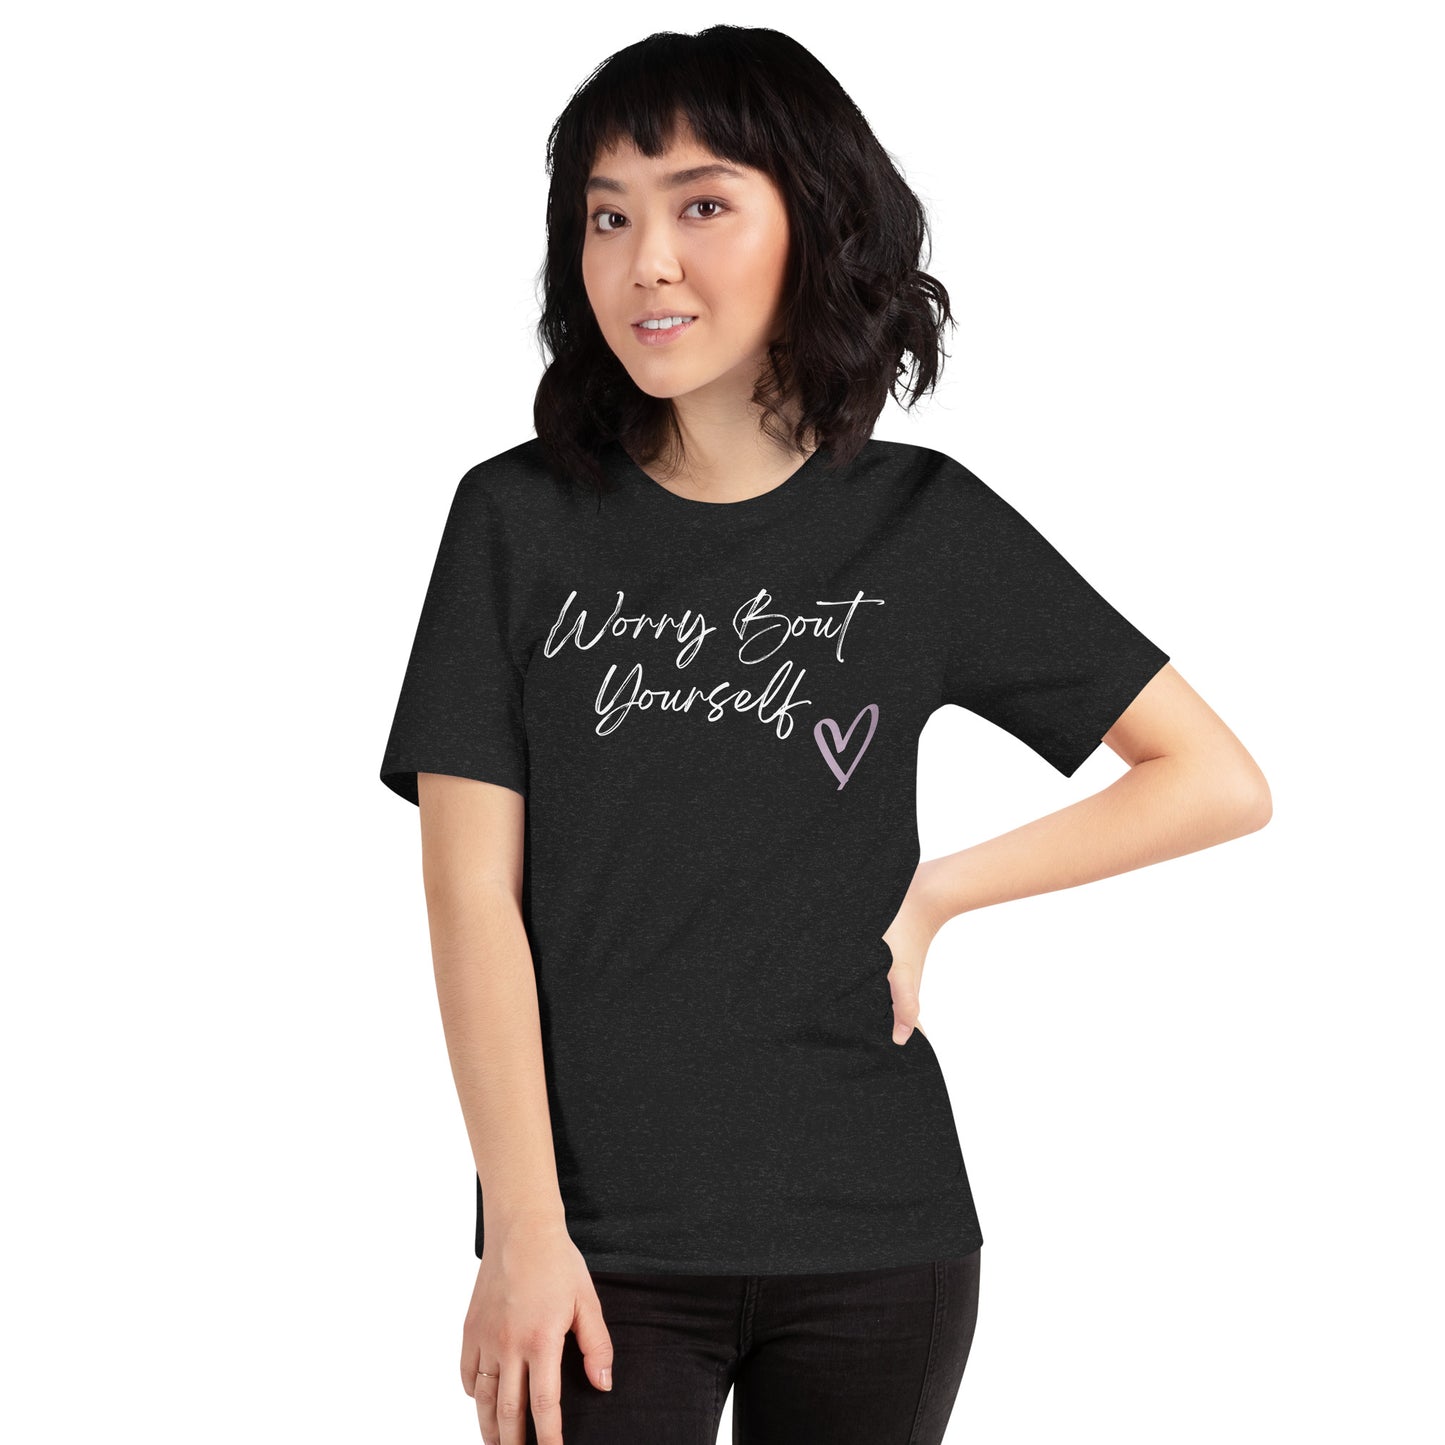 Worry Bout Yourself  T-shirt